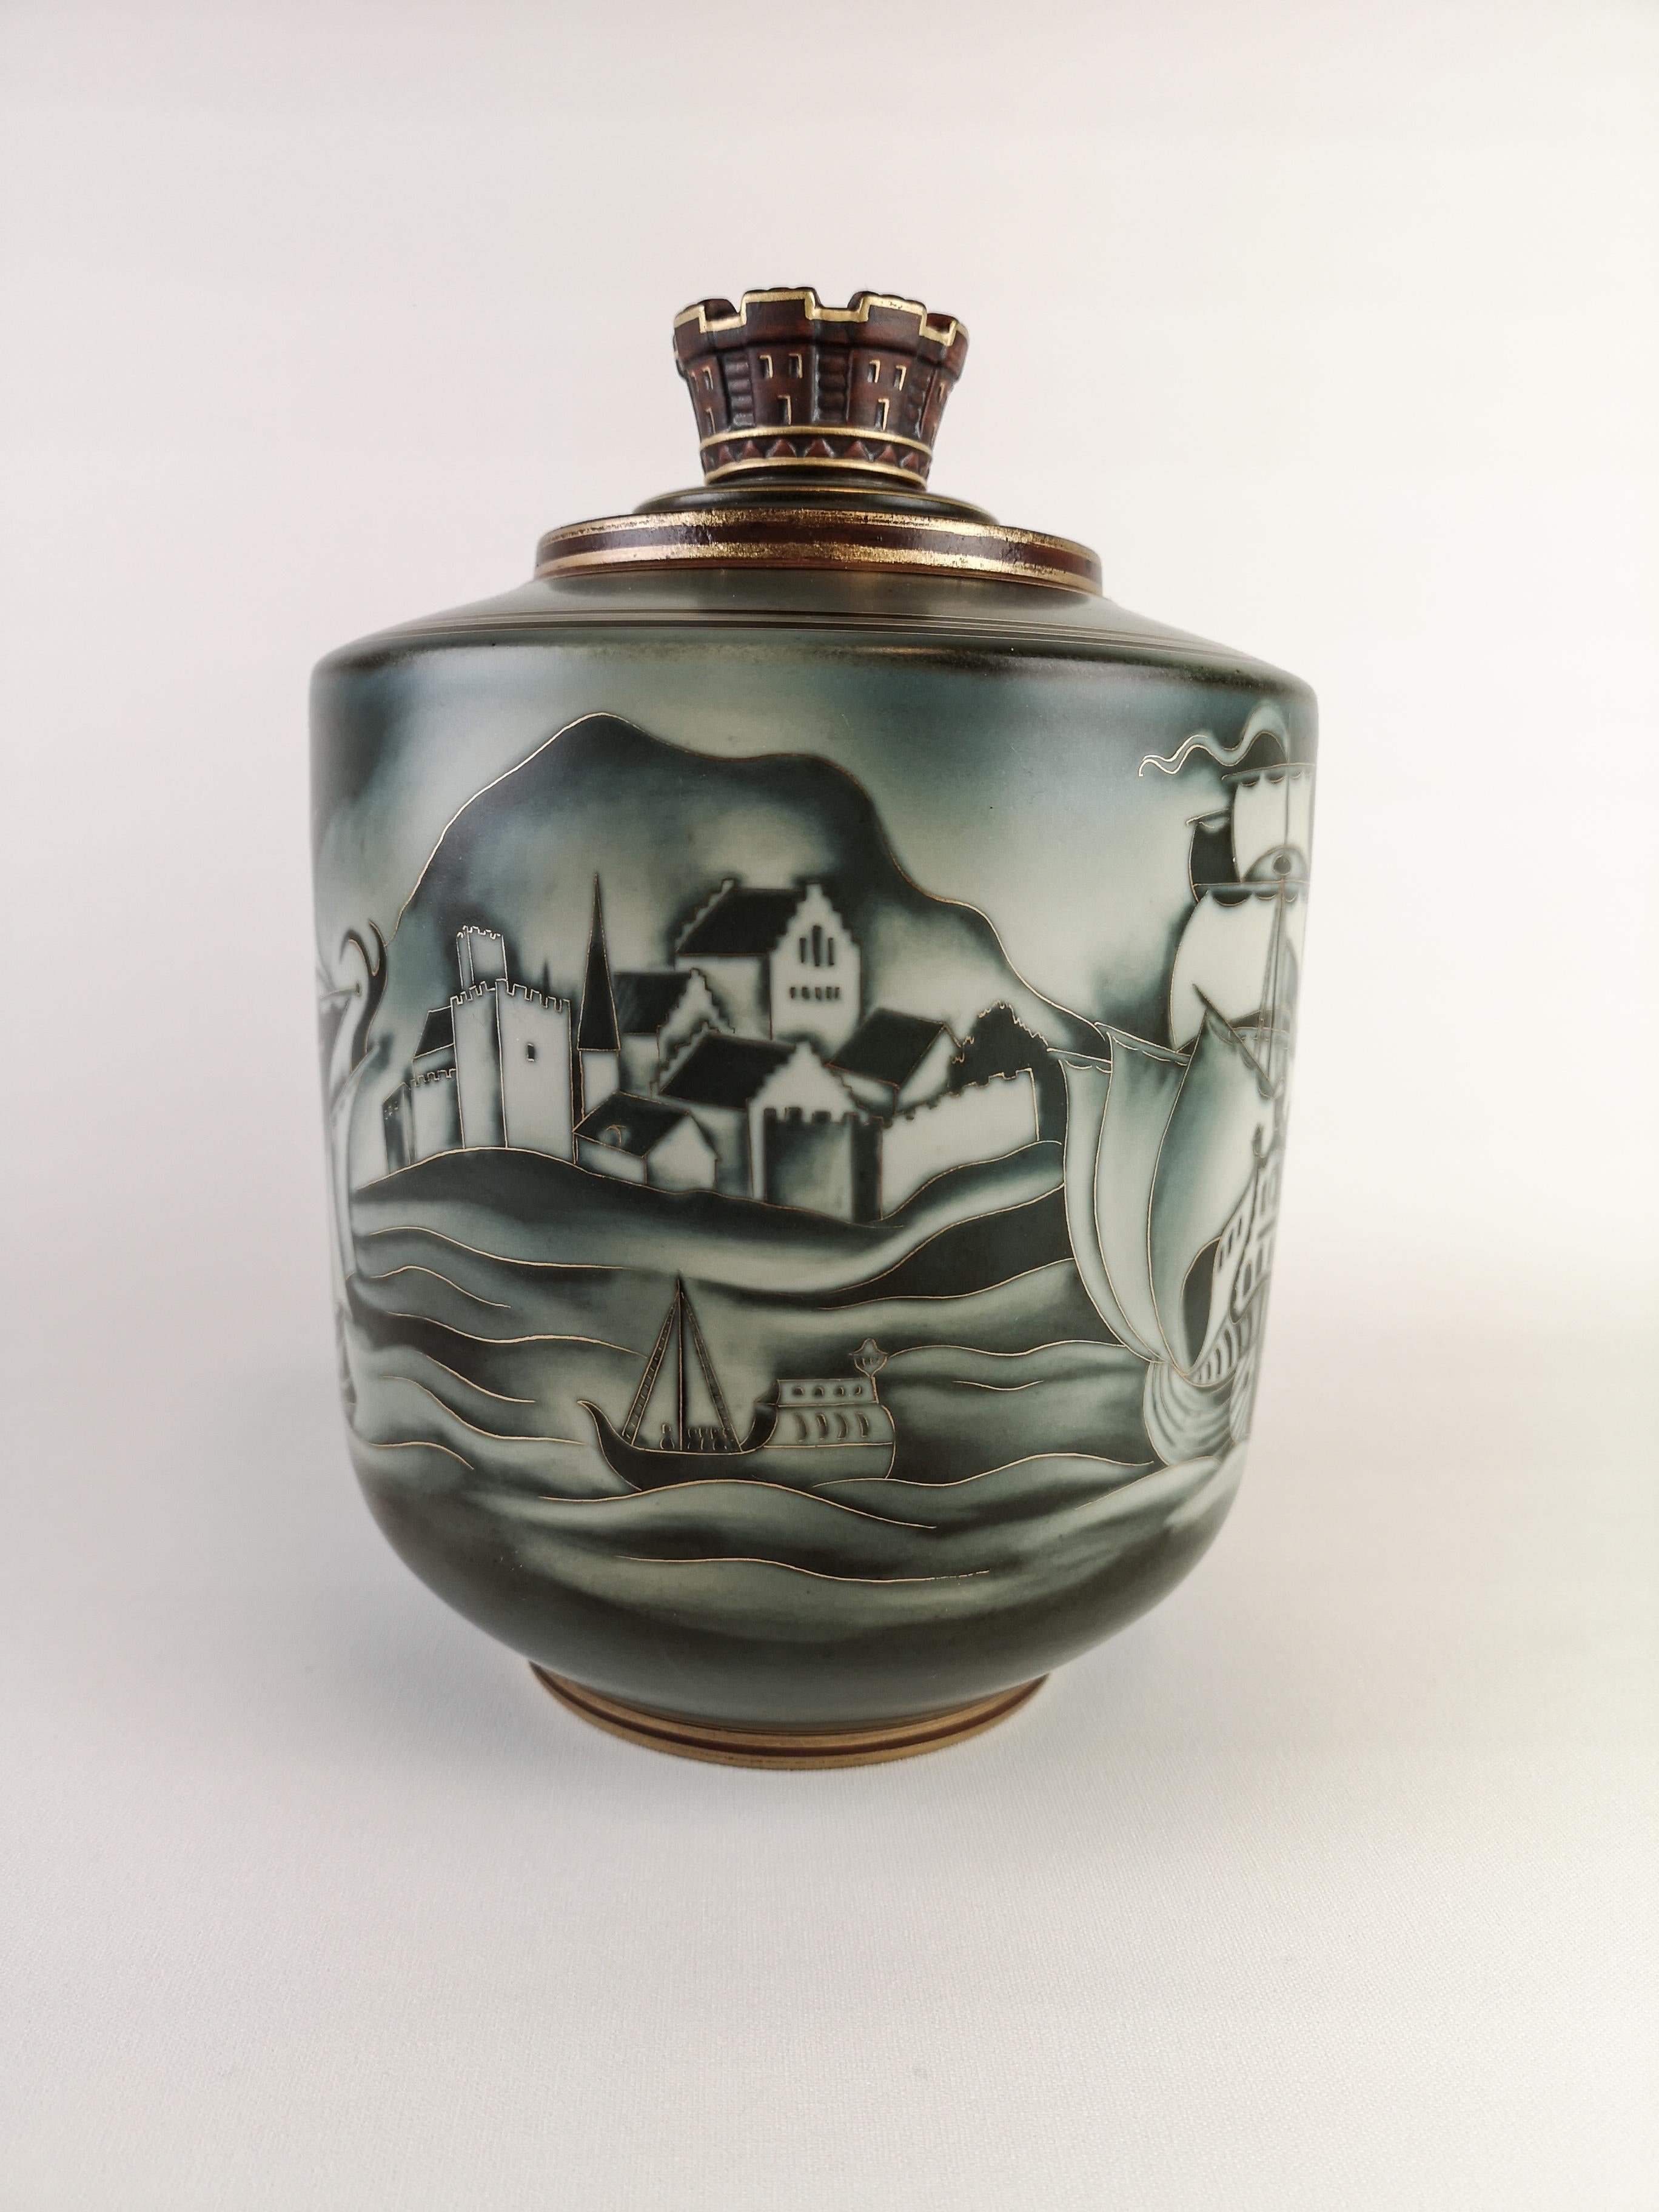 A wonderful urn made and designed by Gunnar Nylund for Rörstrand, Sweden in the 1940s. This Urn is unique, and handmade both in the making of the urn and the painting. One of a kind. 

Very good condition

Measures: H 25 cm D 20 cm.

 